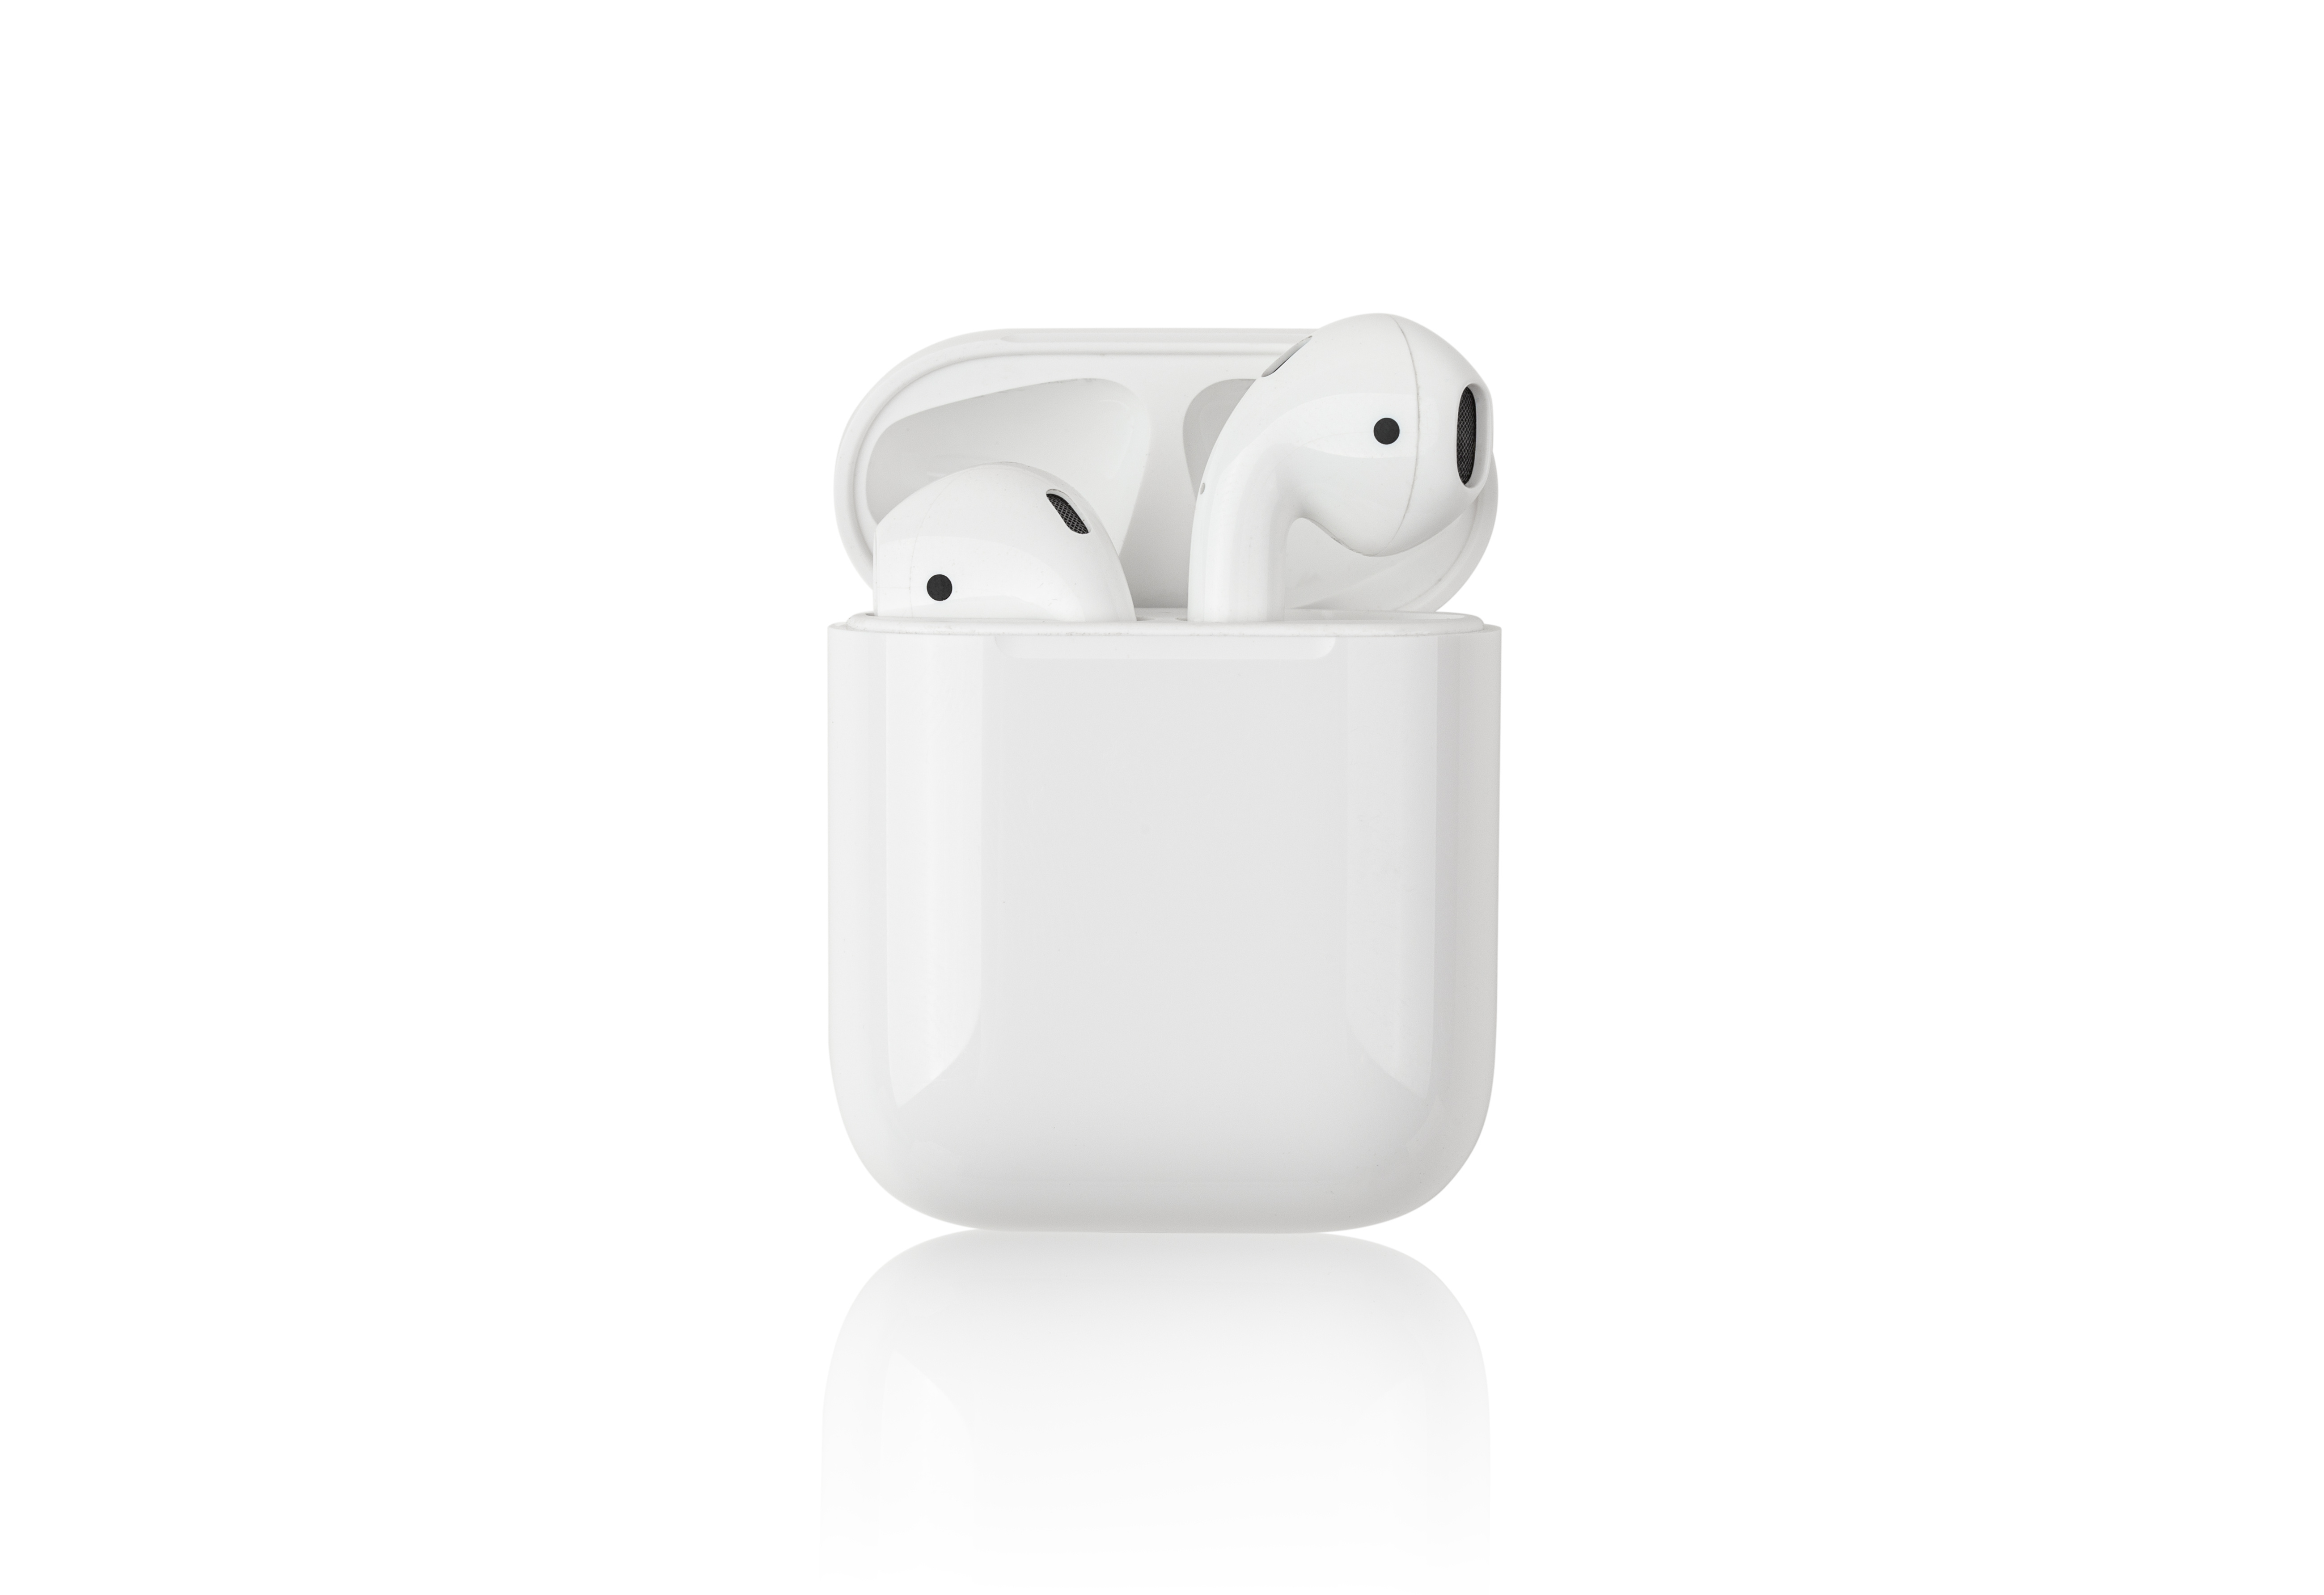 pair of apple airpods 1st generation